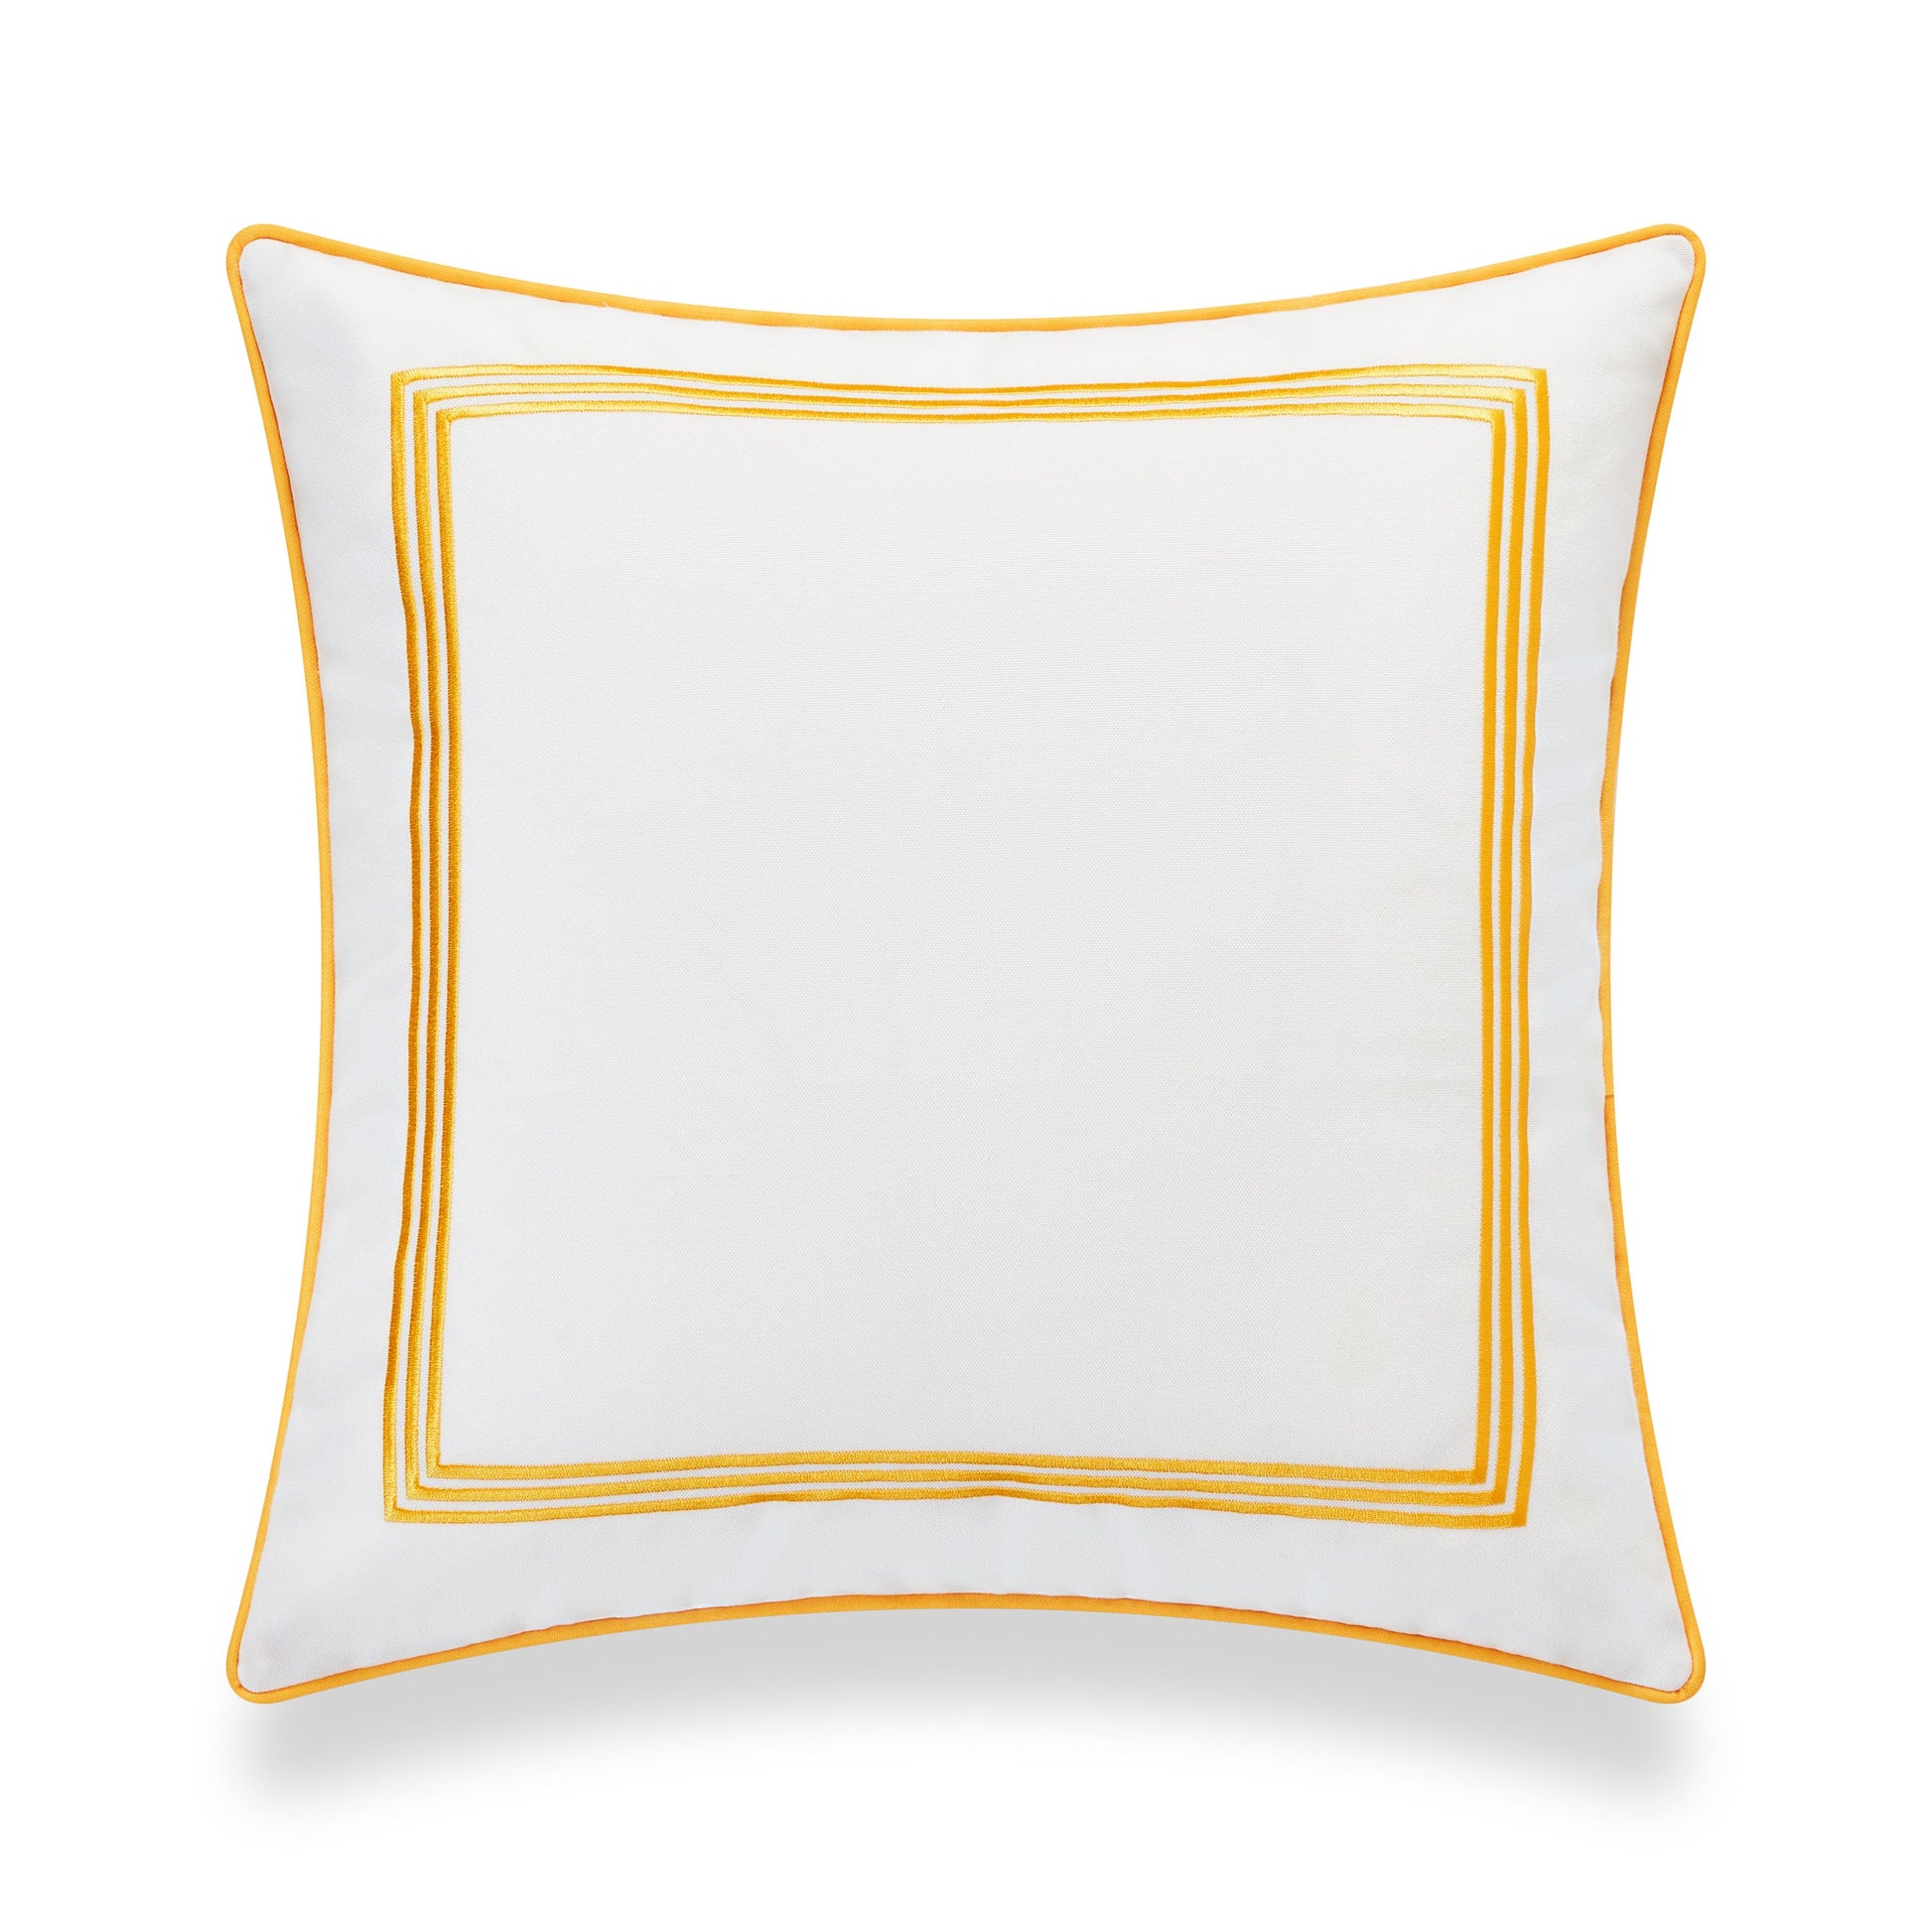 Coastal Indoor Outdoor Pillow Cover, Embroidered Square Line, Yellow, 20"x20"-4